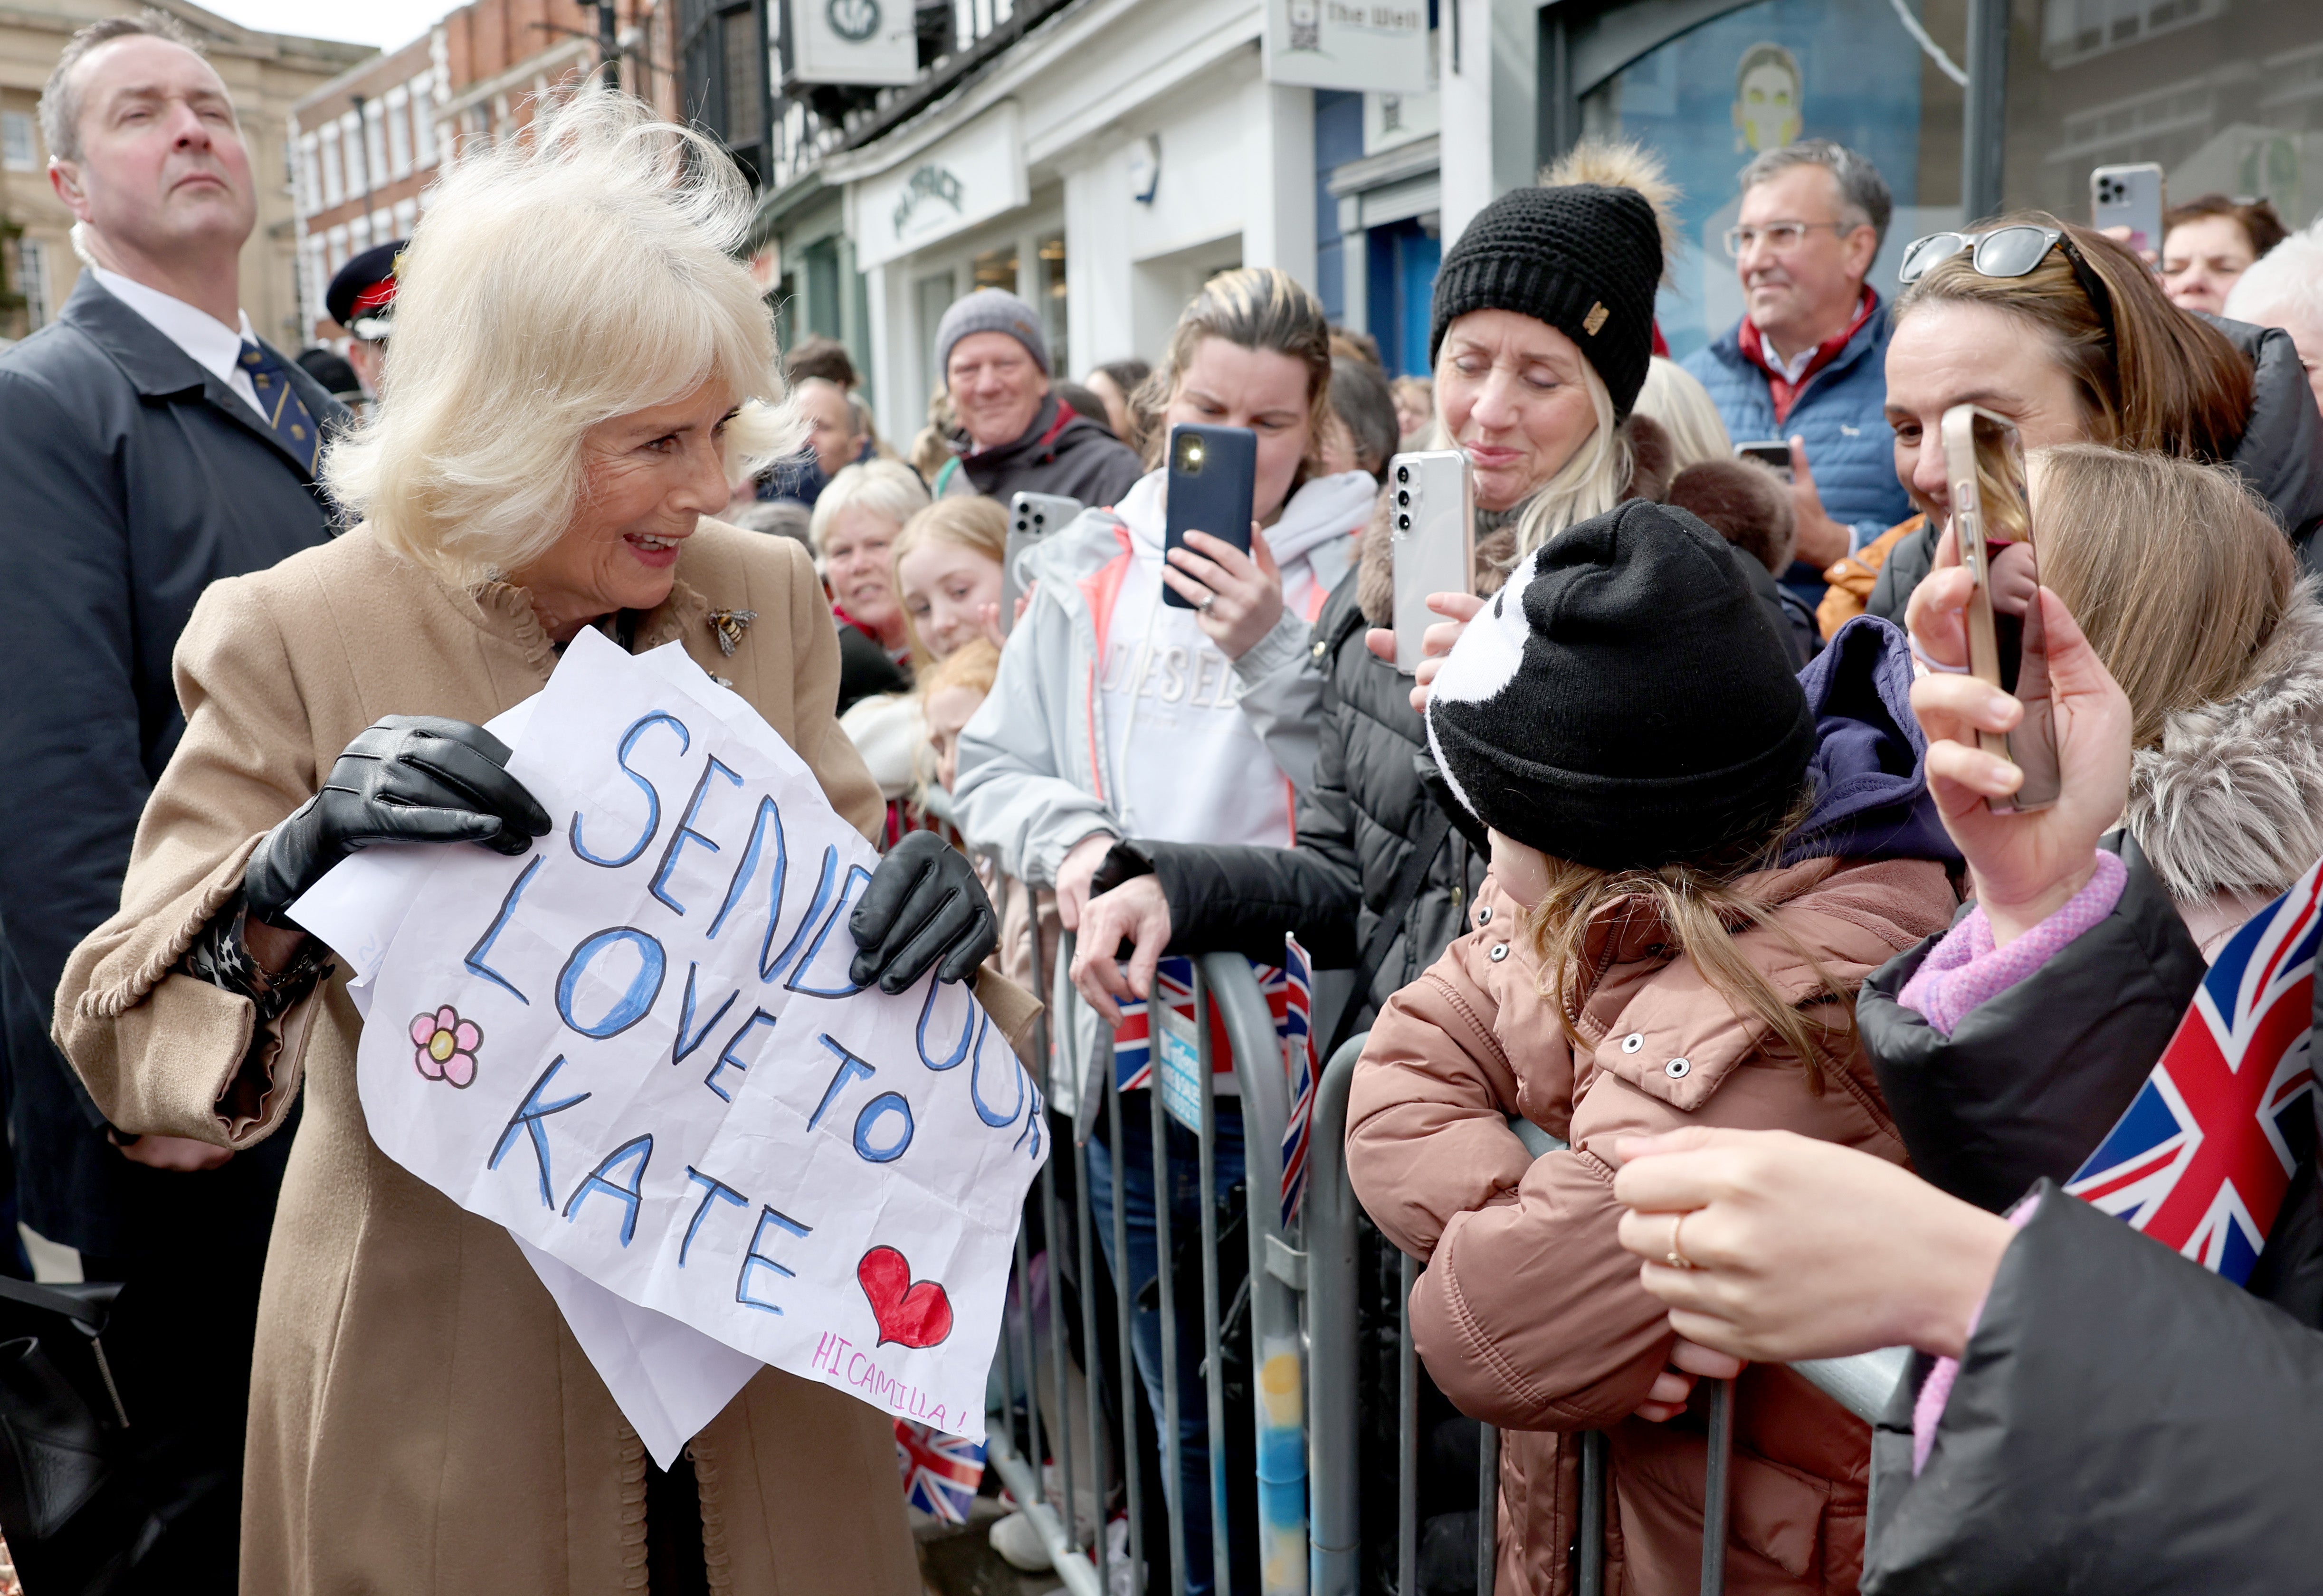 The Queen said the Princess of Wales ‘will be thrilled’ after she received posters with messages of love to Kate